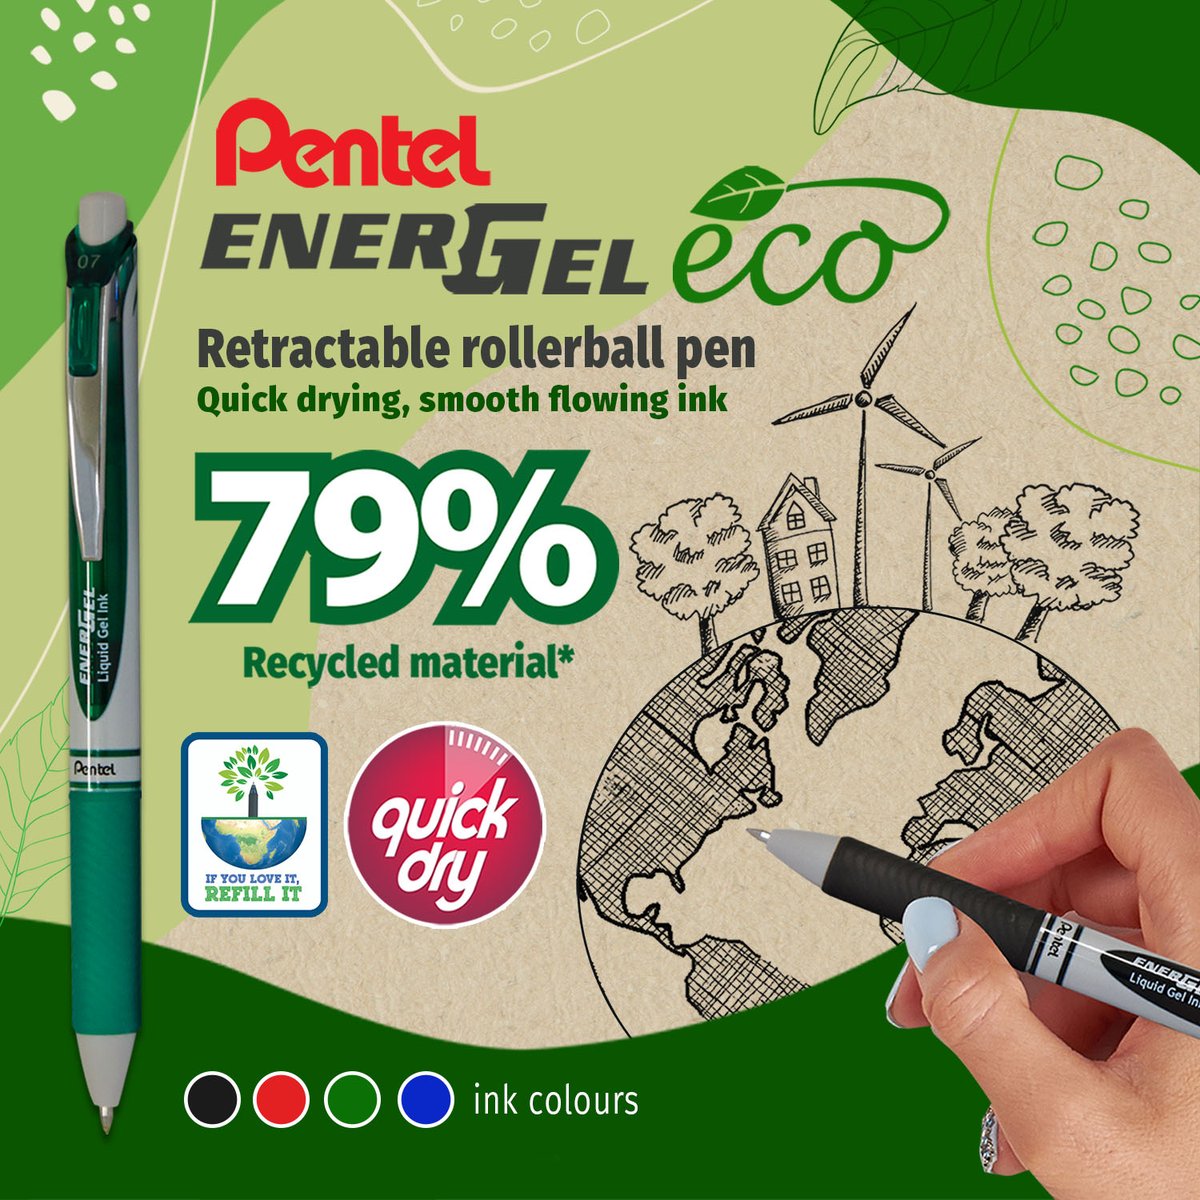 Make your mark, leave a positive impact. The EnerGel Eco is not only refillable and recyclable…it’s always reliable ✔️
bit.ly/3xb2XHj
#penteluk #energel #gel #pen #environment #recycle #savetheplanet #eco #writing #green #reducereusercycle #sustainabilitystationery